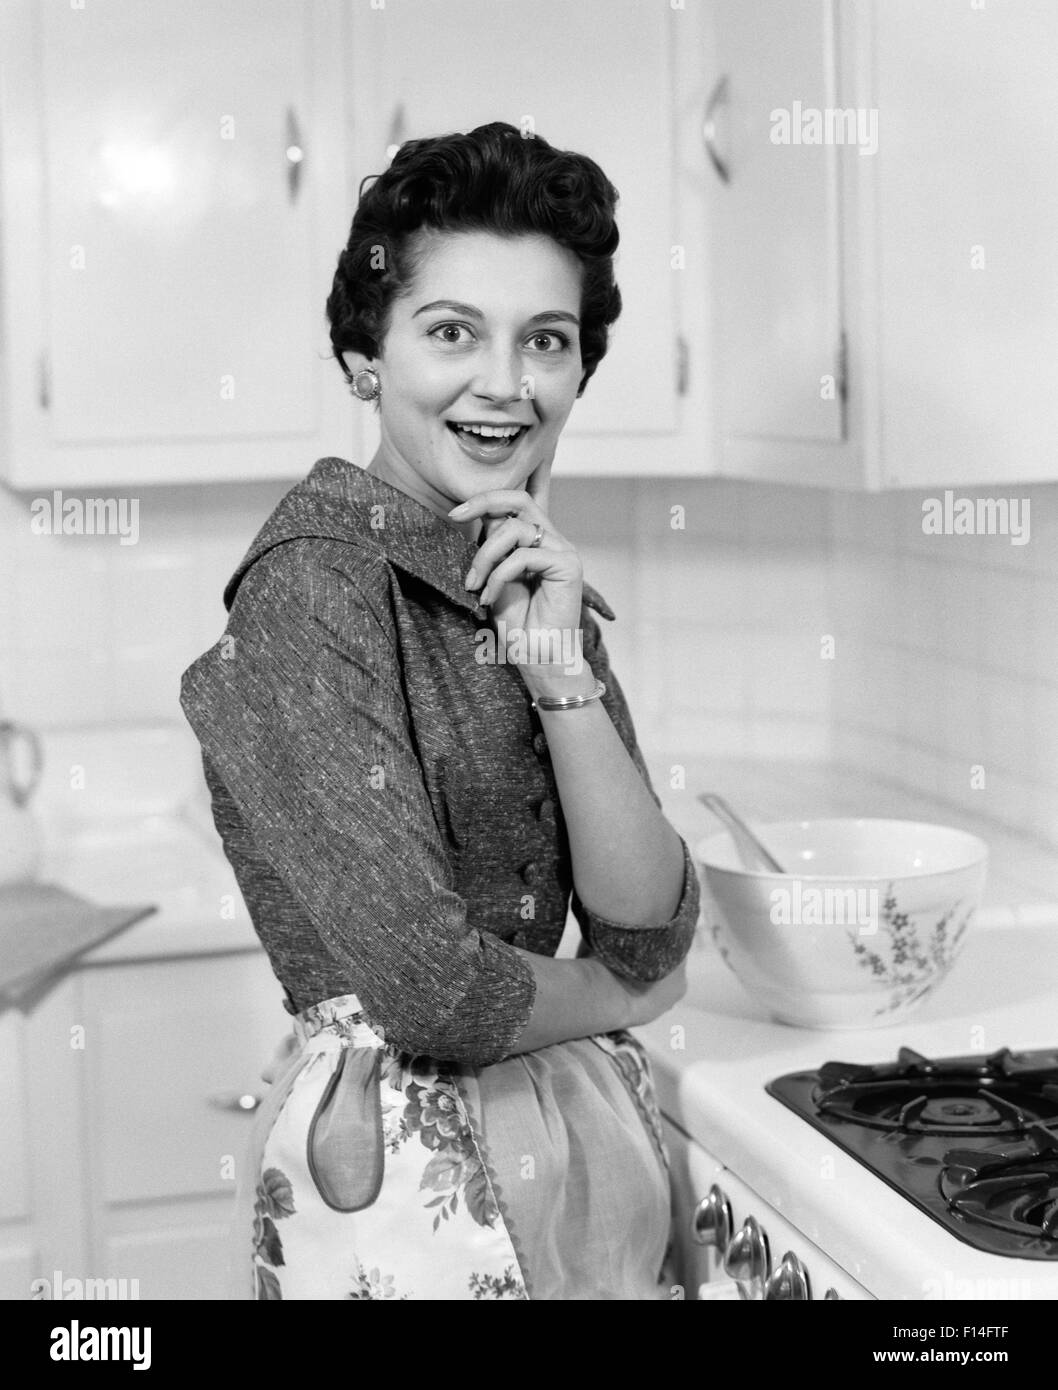 1950s SMILING BRUNETTE WOMAN HOUSEWIFE BESIDE STOVE WEARING APRON IN KITCHEN SURPRISED FACIAL EXPRESSION LOOKING AT CAMERA Stock Photo